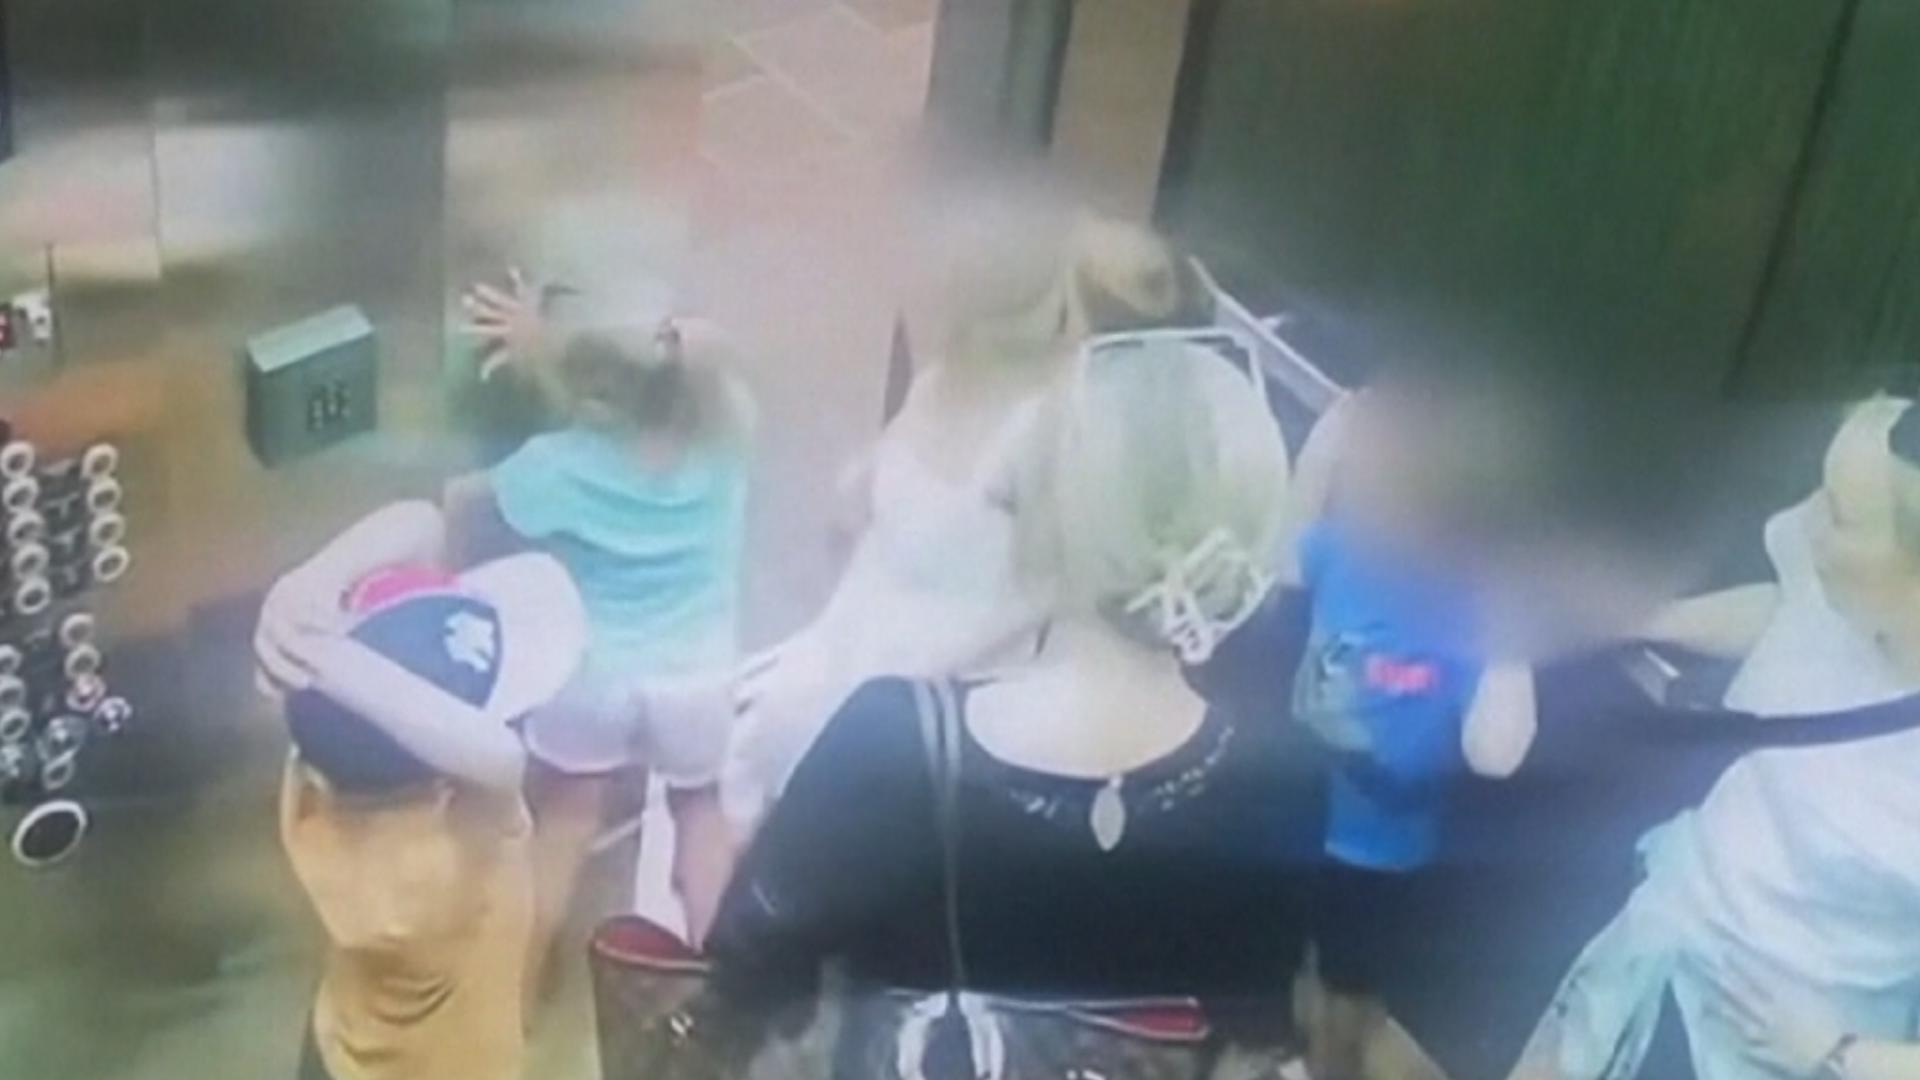 A young girl got her arm stuck in an elevator. Here's what happened.